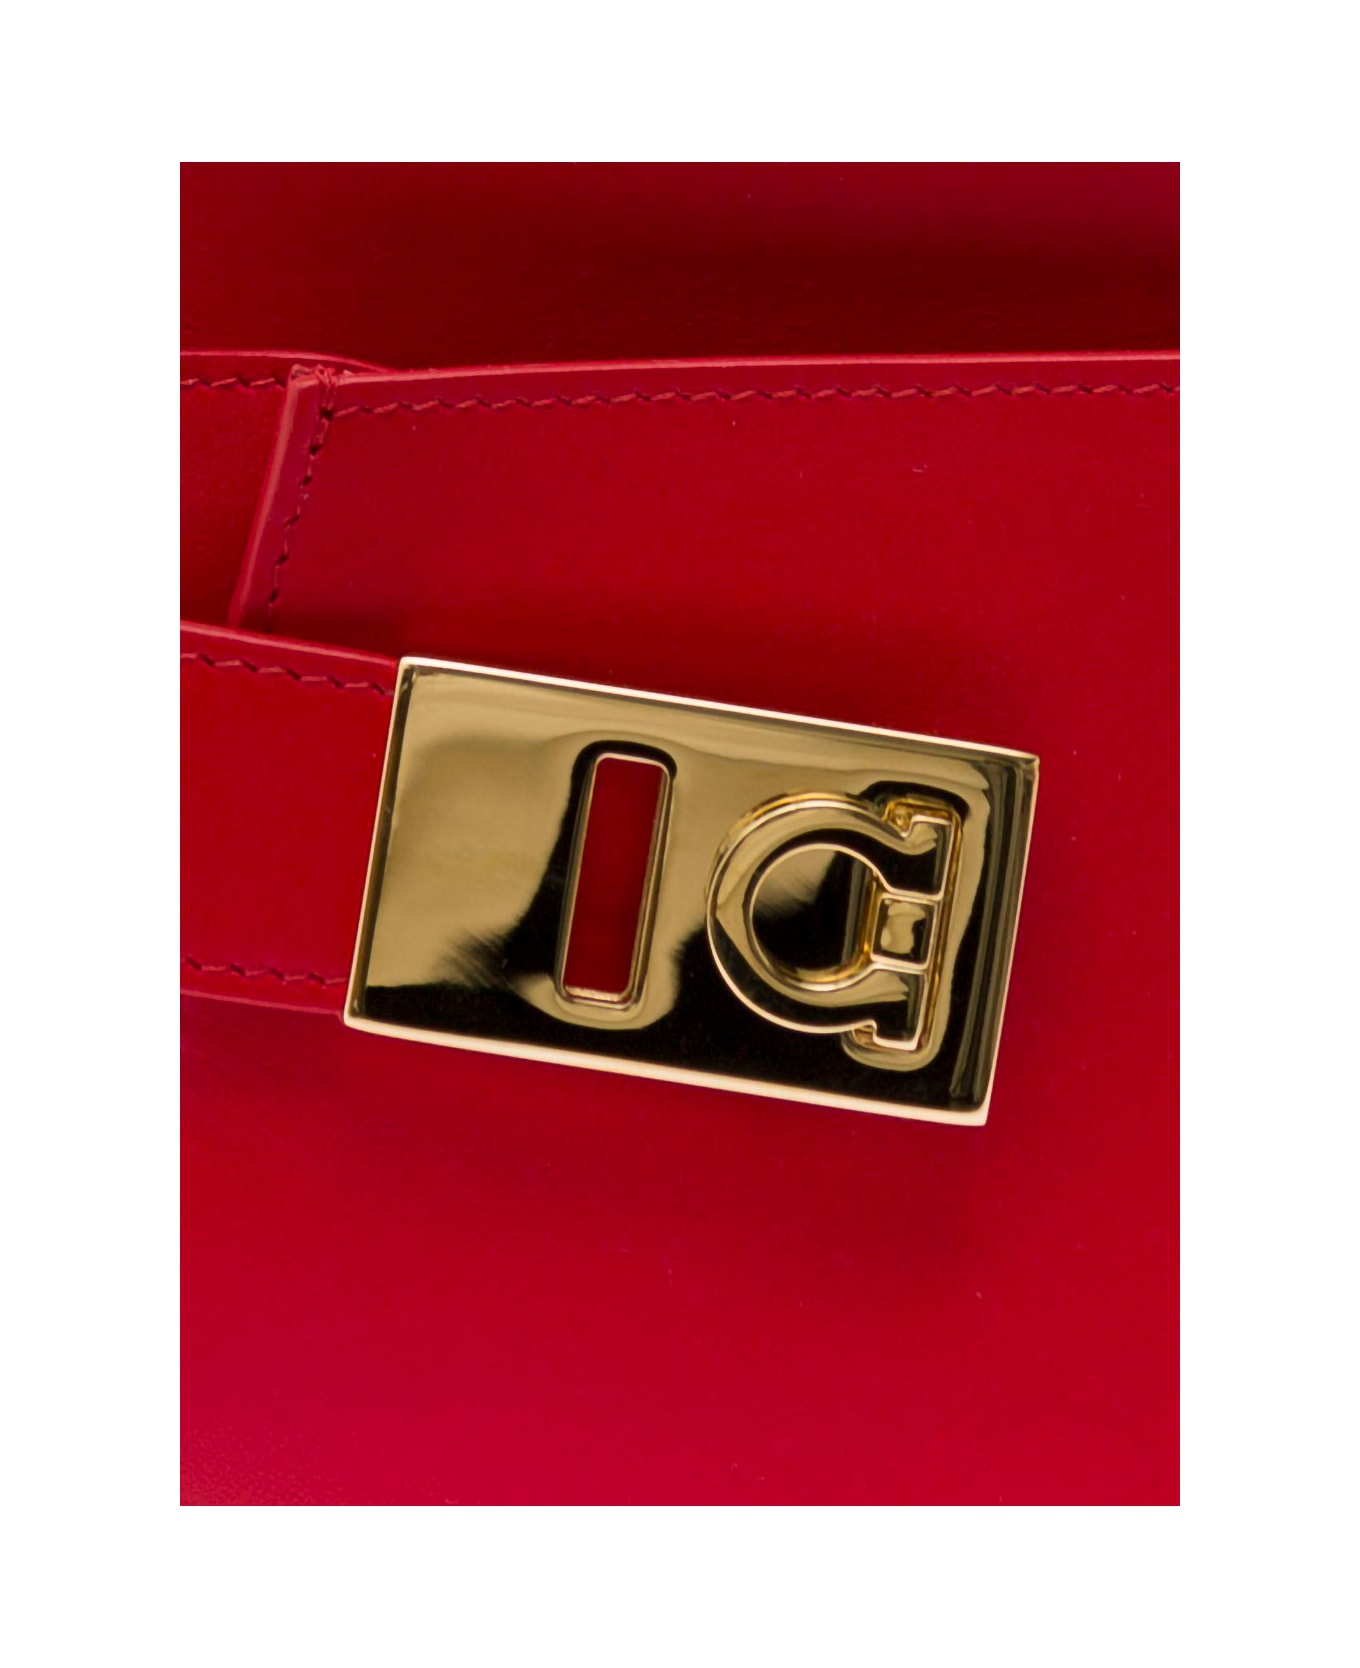 Ferragamo 'camera Case S' Red Crossbody Bag With Gancini Buckle In Leather Woman - Rosso